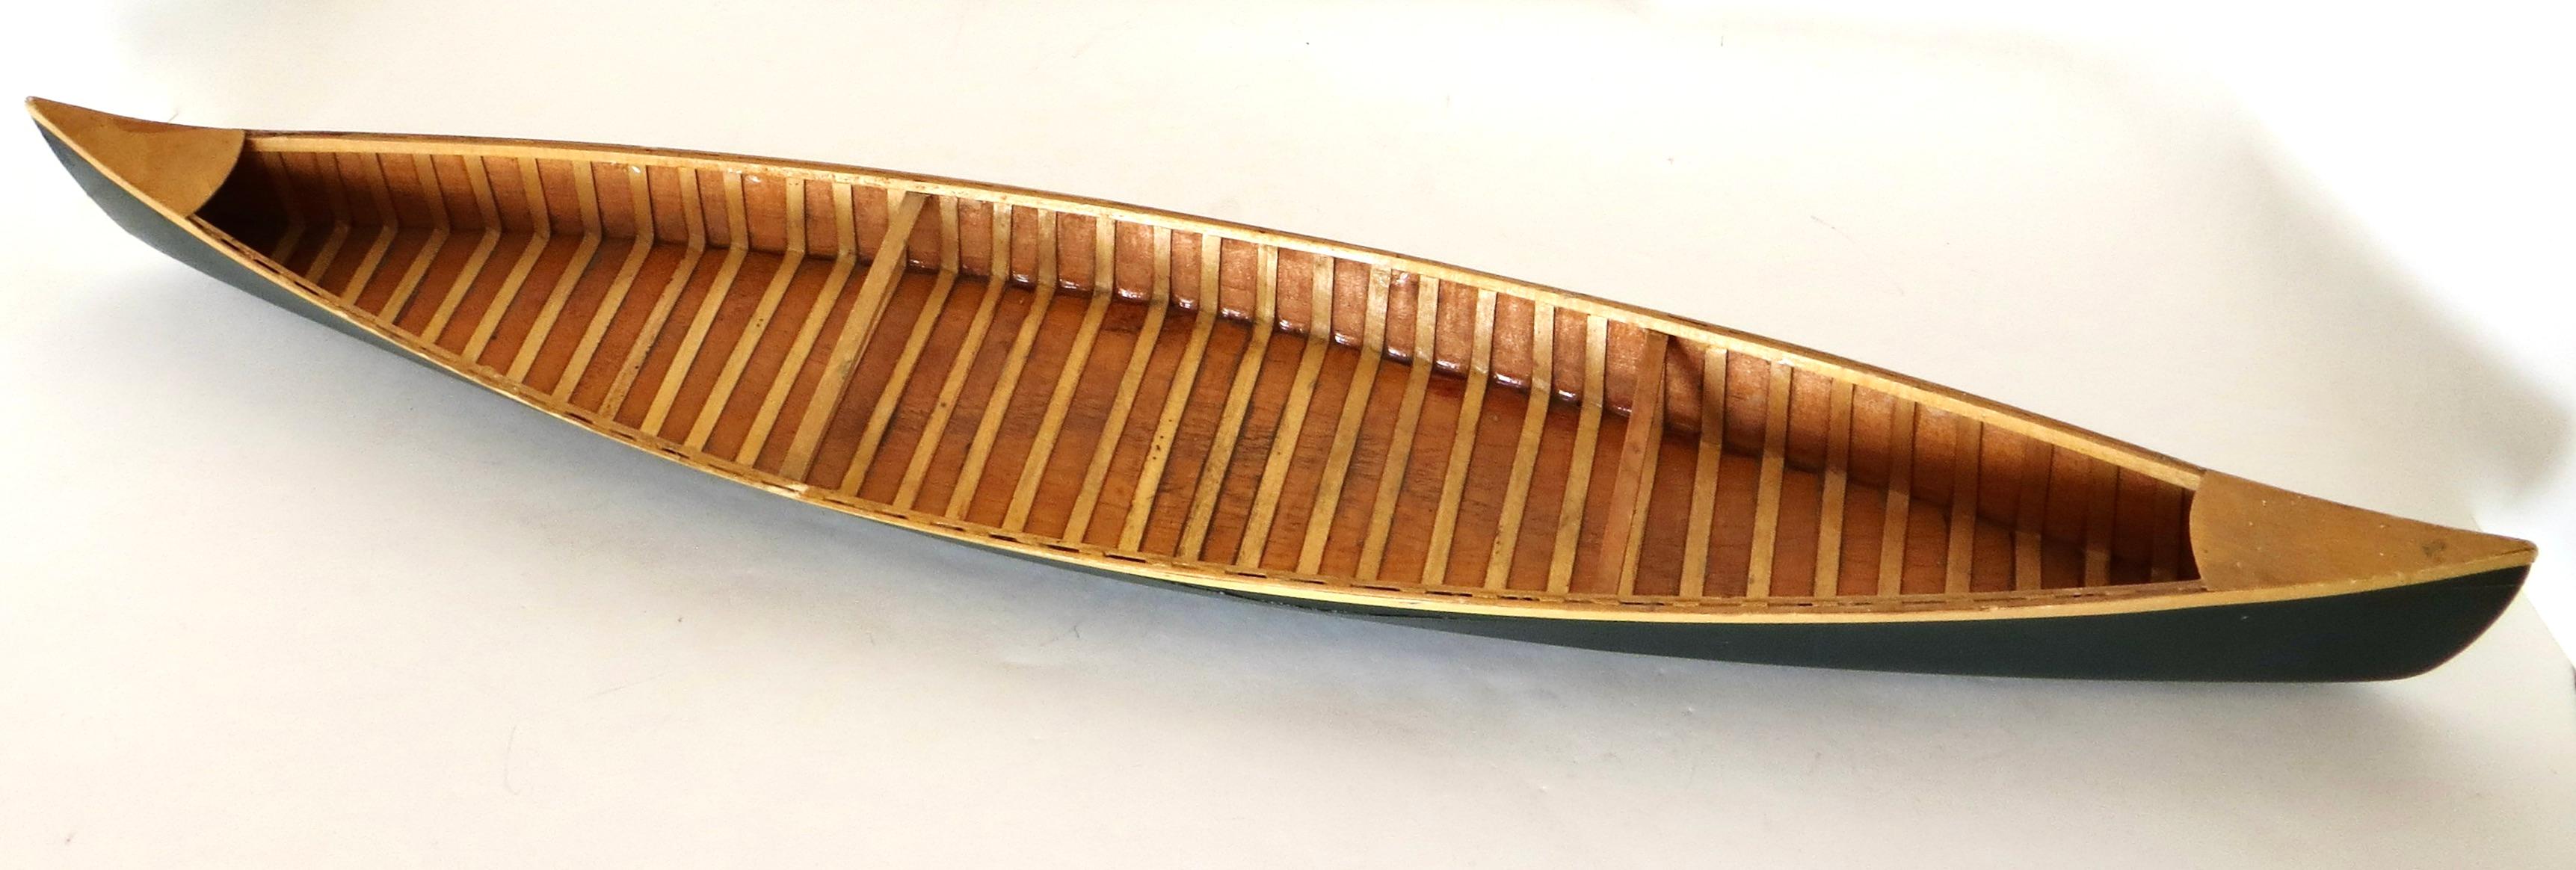 Hand-Crafted Miniature Model Wooden Canoe, American Circa 1950's For Sale